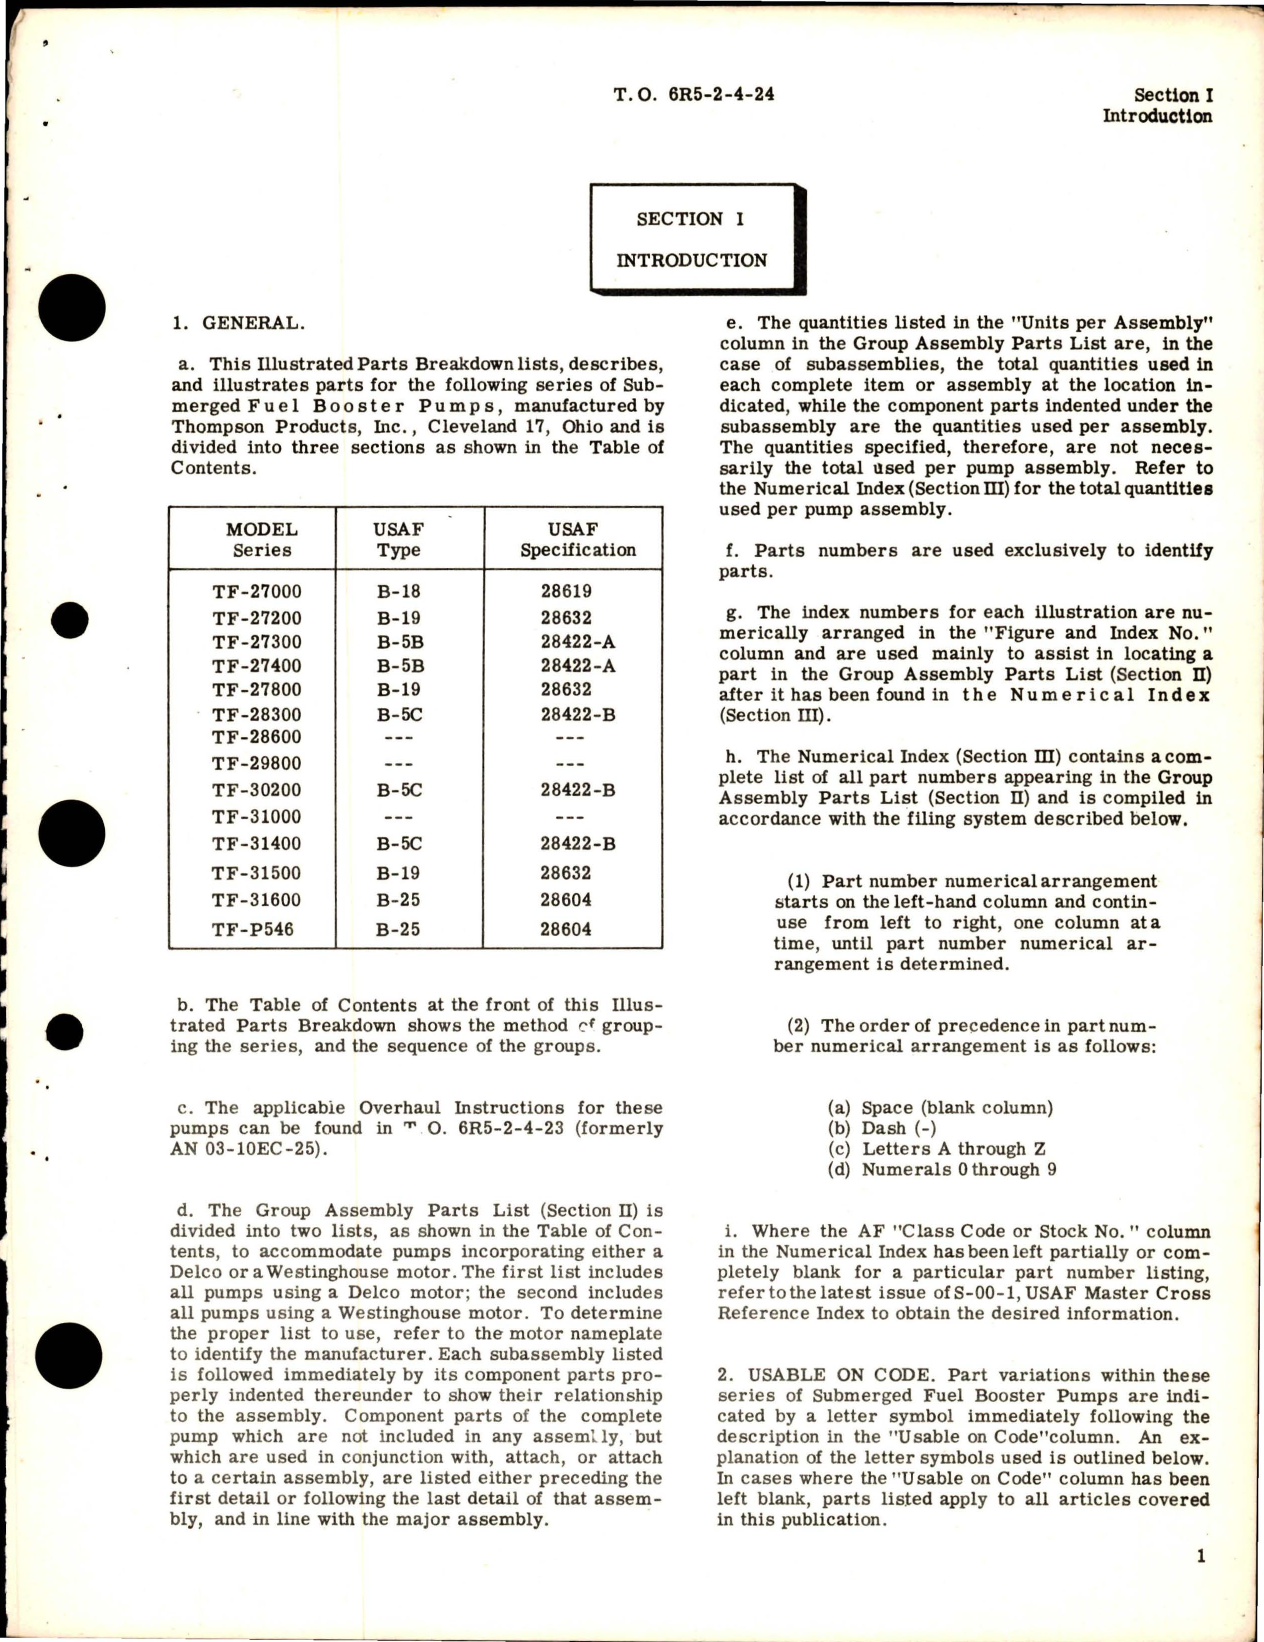 Sample page 5 from AirCorps Library document: Illustrated Parts Breakdown for Submerged Fuel Booster Pumps - Types B-5B, B-5C, B-18, B-19 and B-25